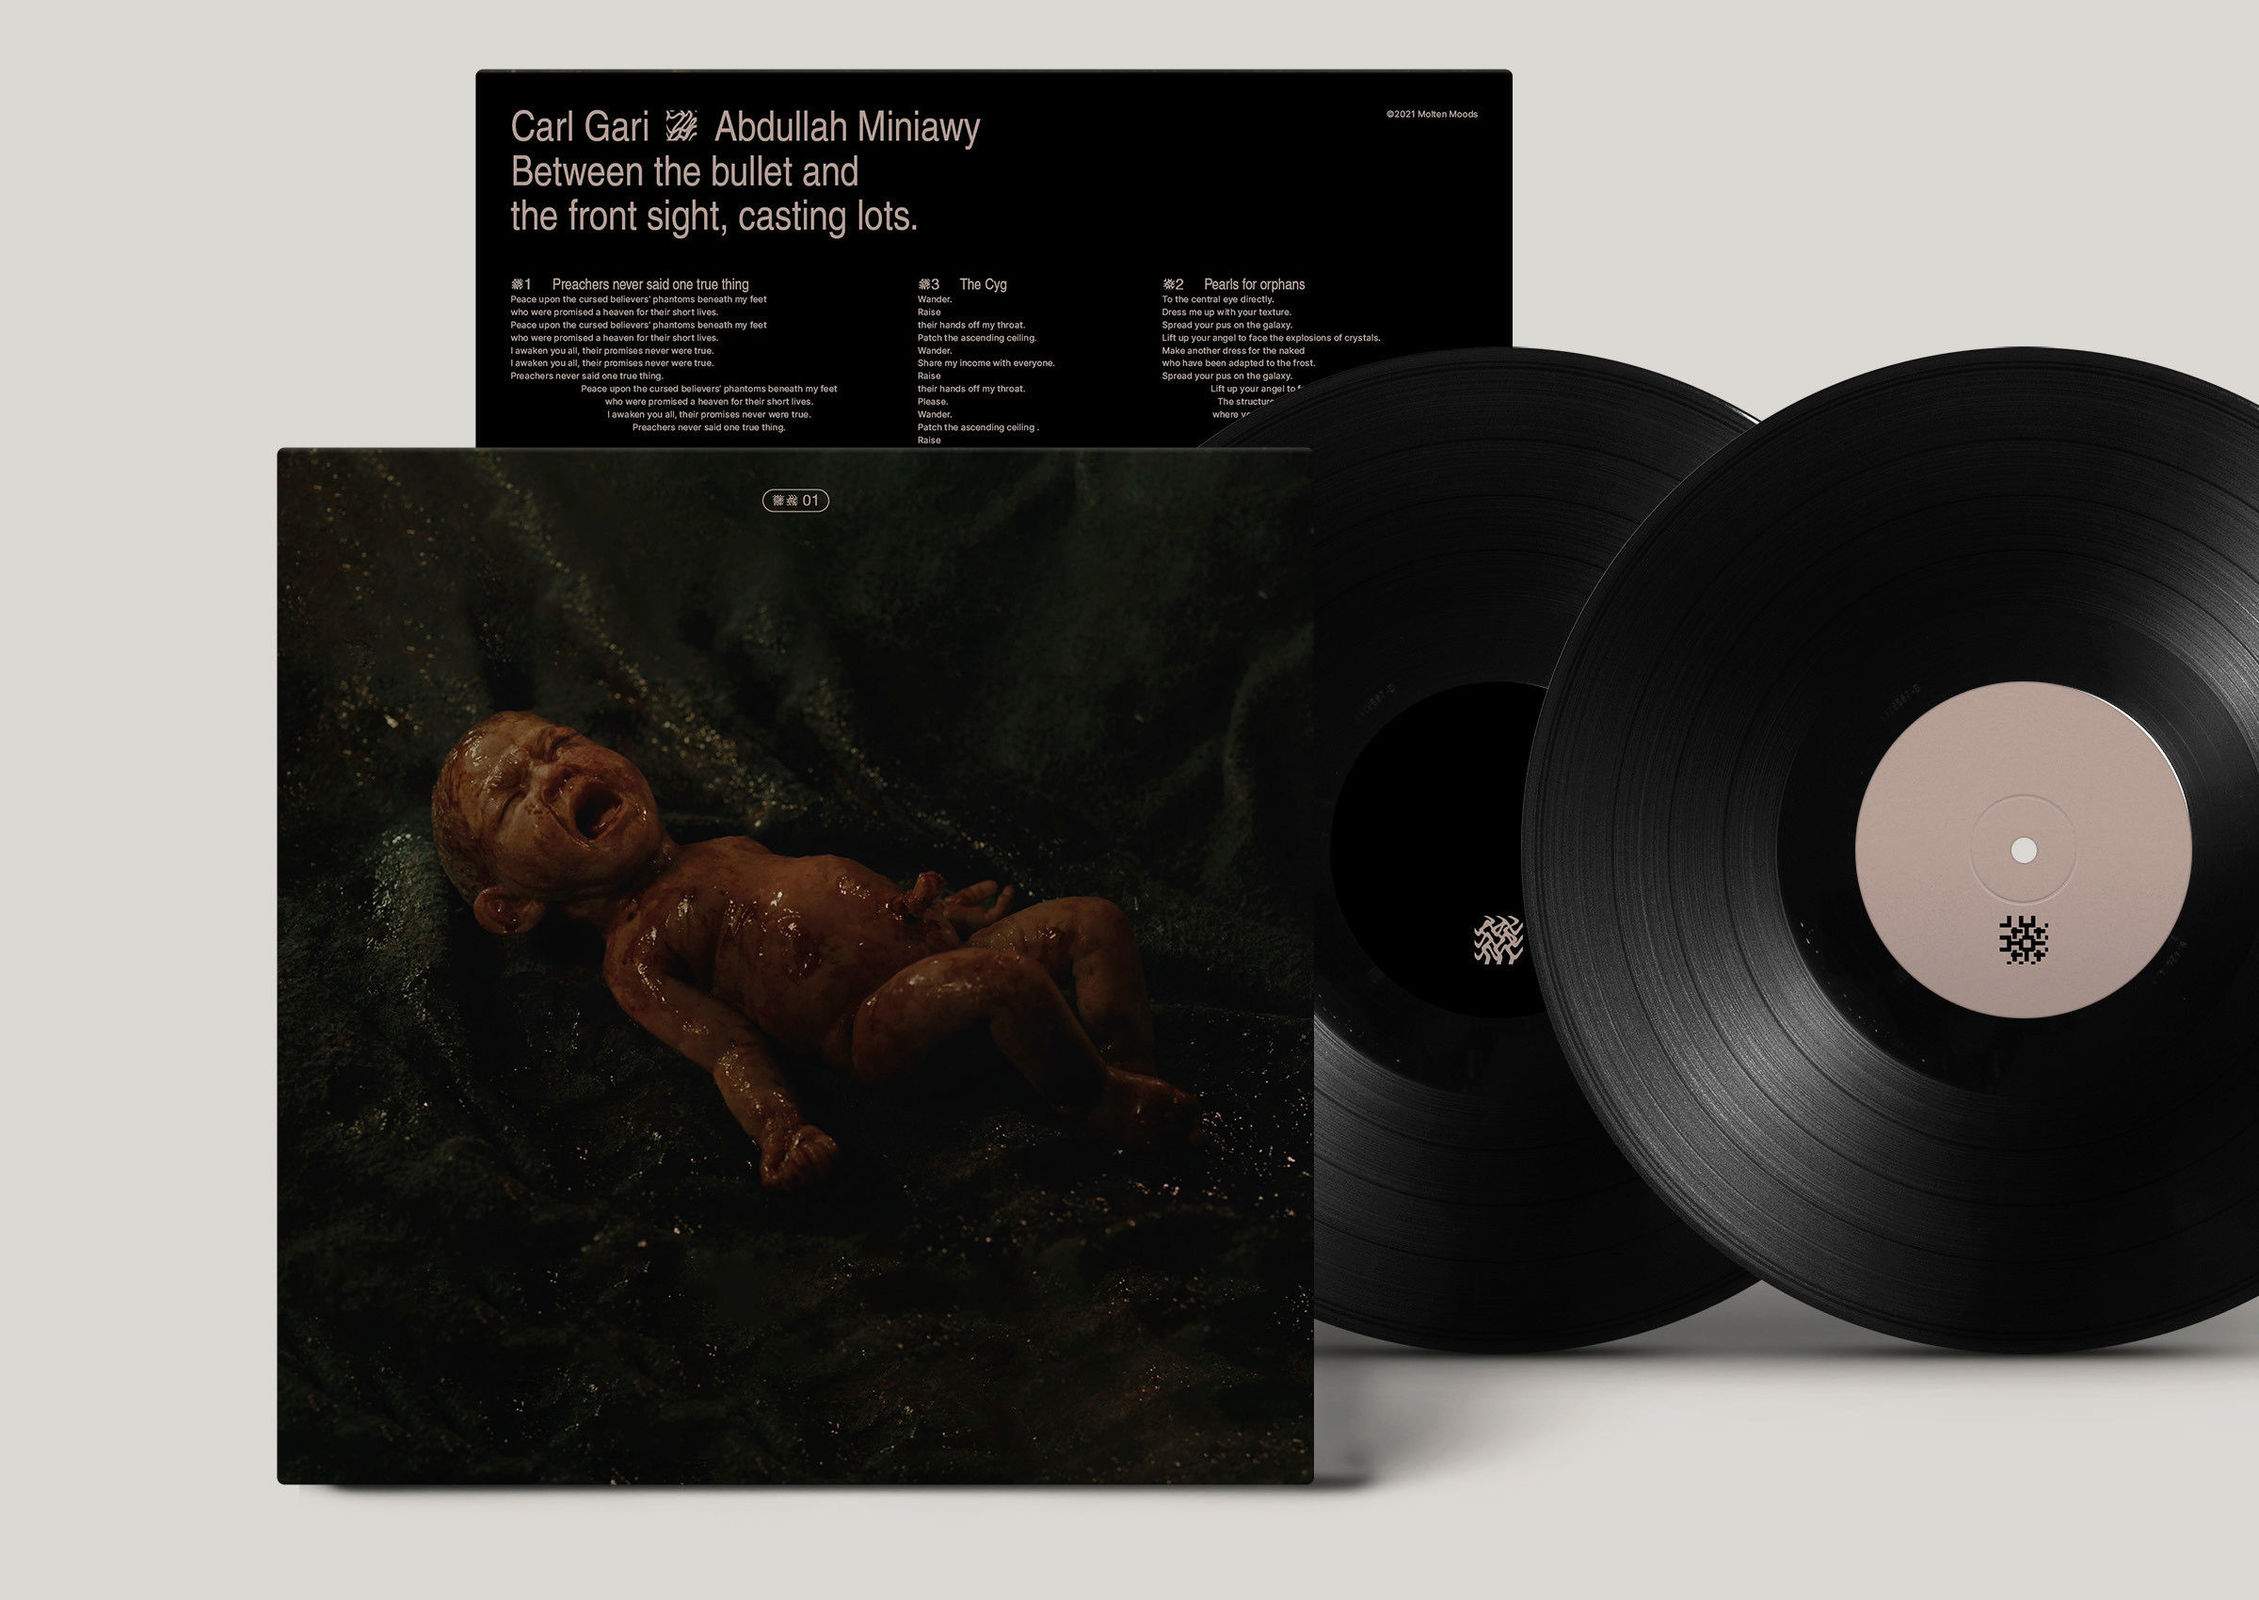 Carl Gari & Abdullah Miniawy - Between the bullet and the front sight, casting lots (Live at Haus der Kunst) 12" Vinyl